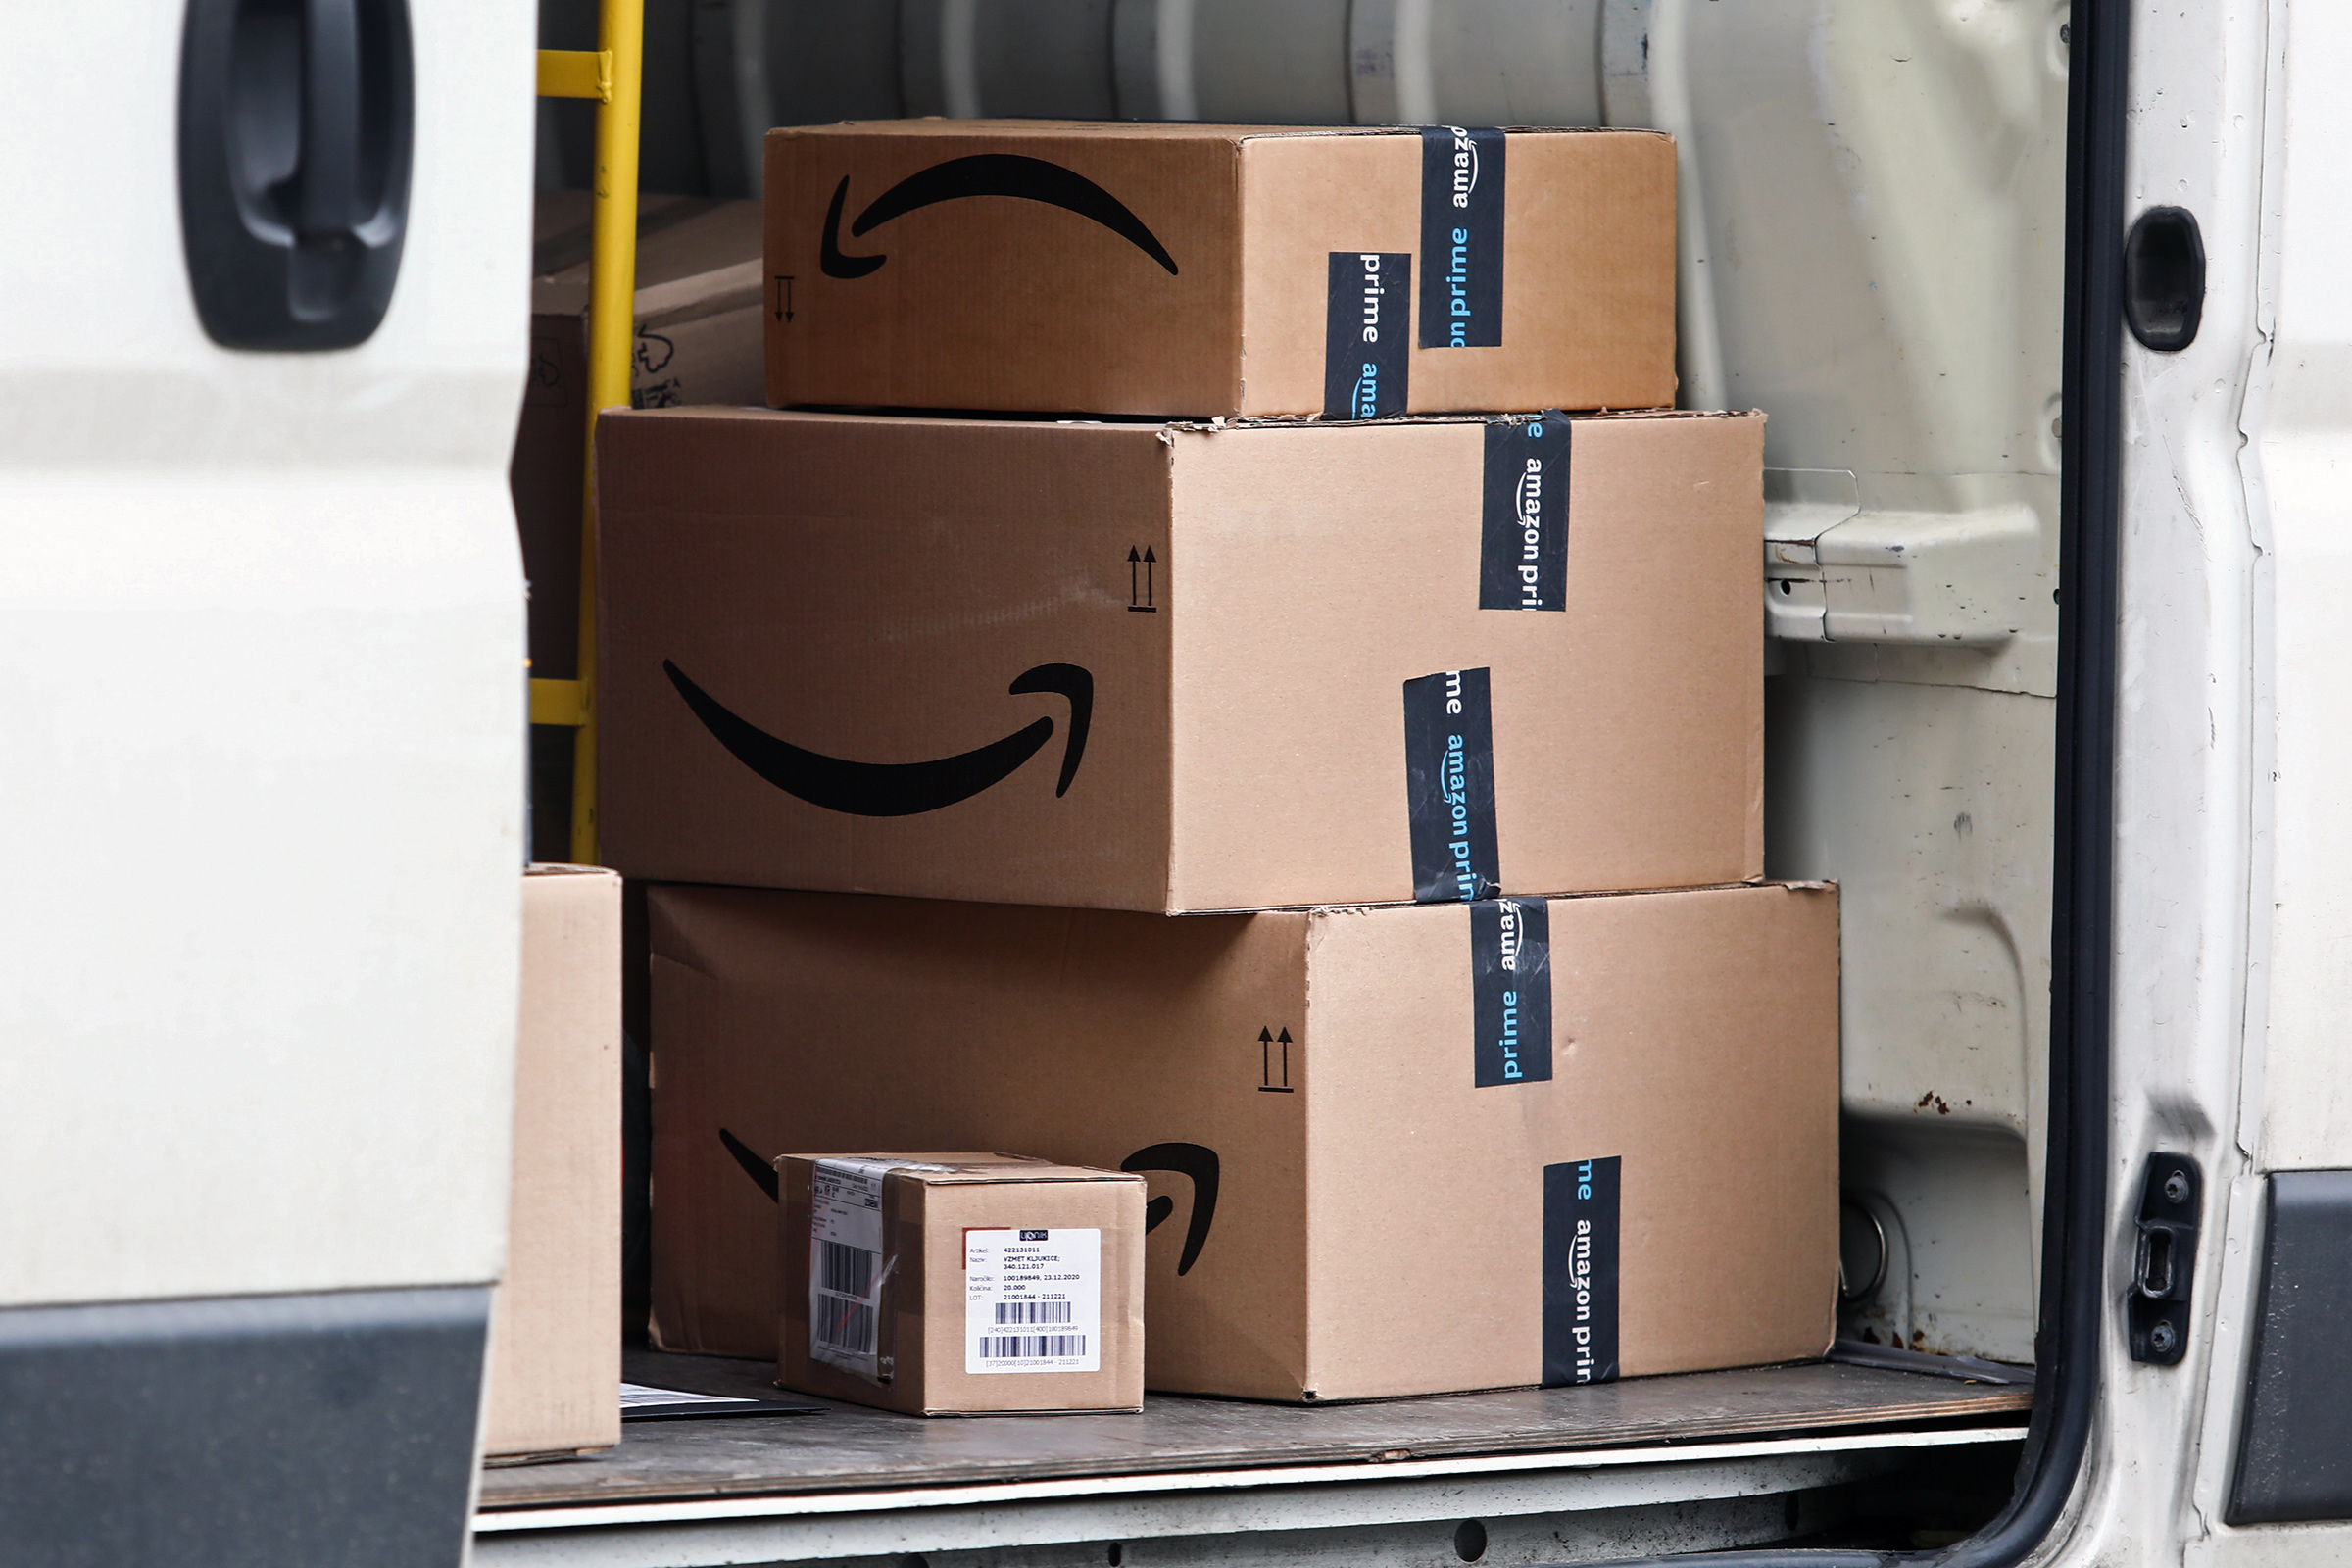 Amazon boxes are seen inside a delivery truck on April 20, 2022.